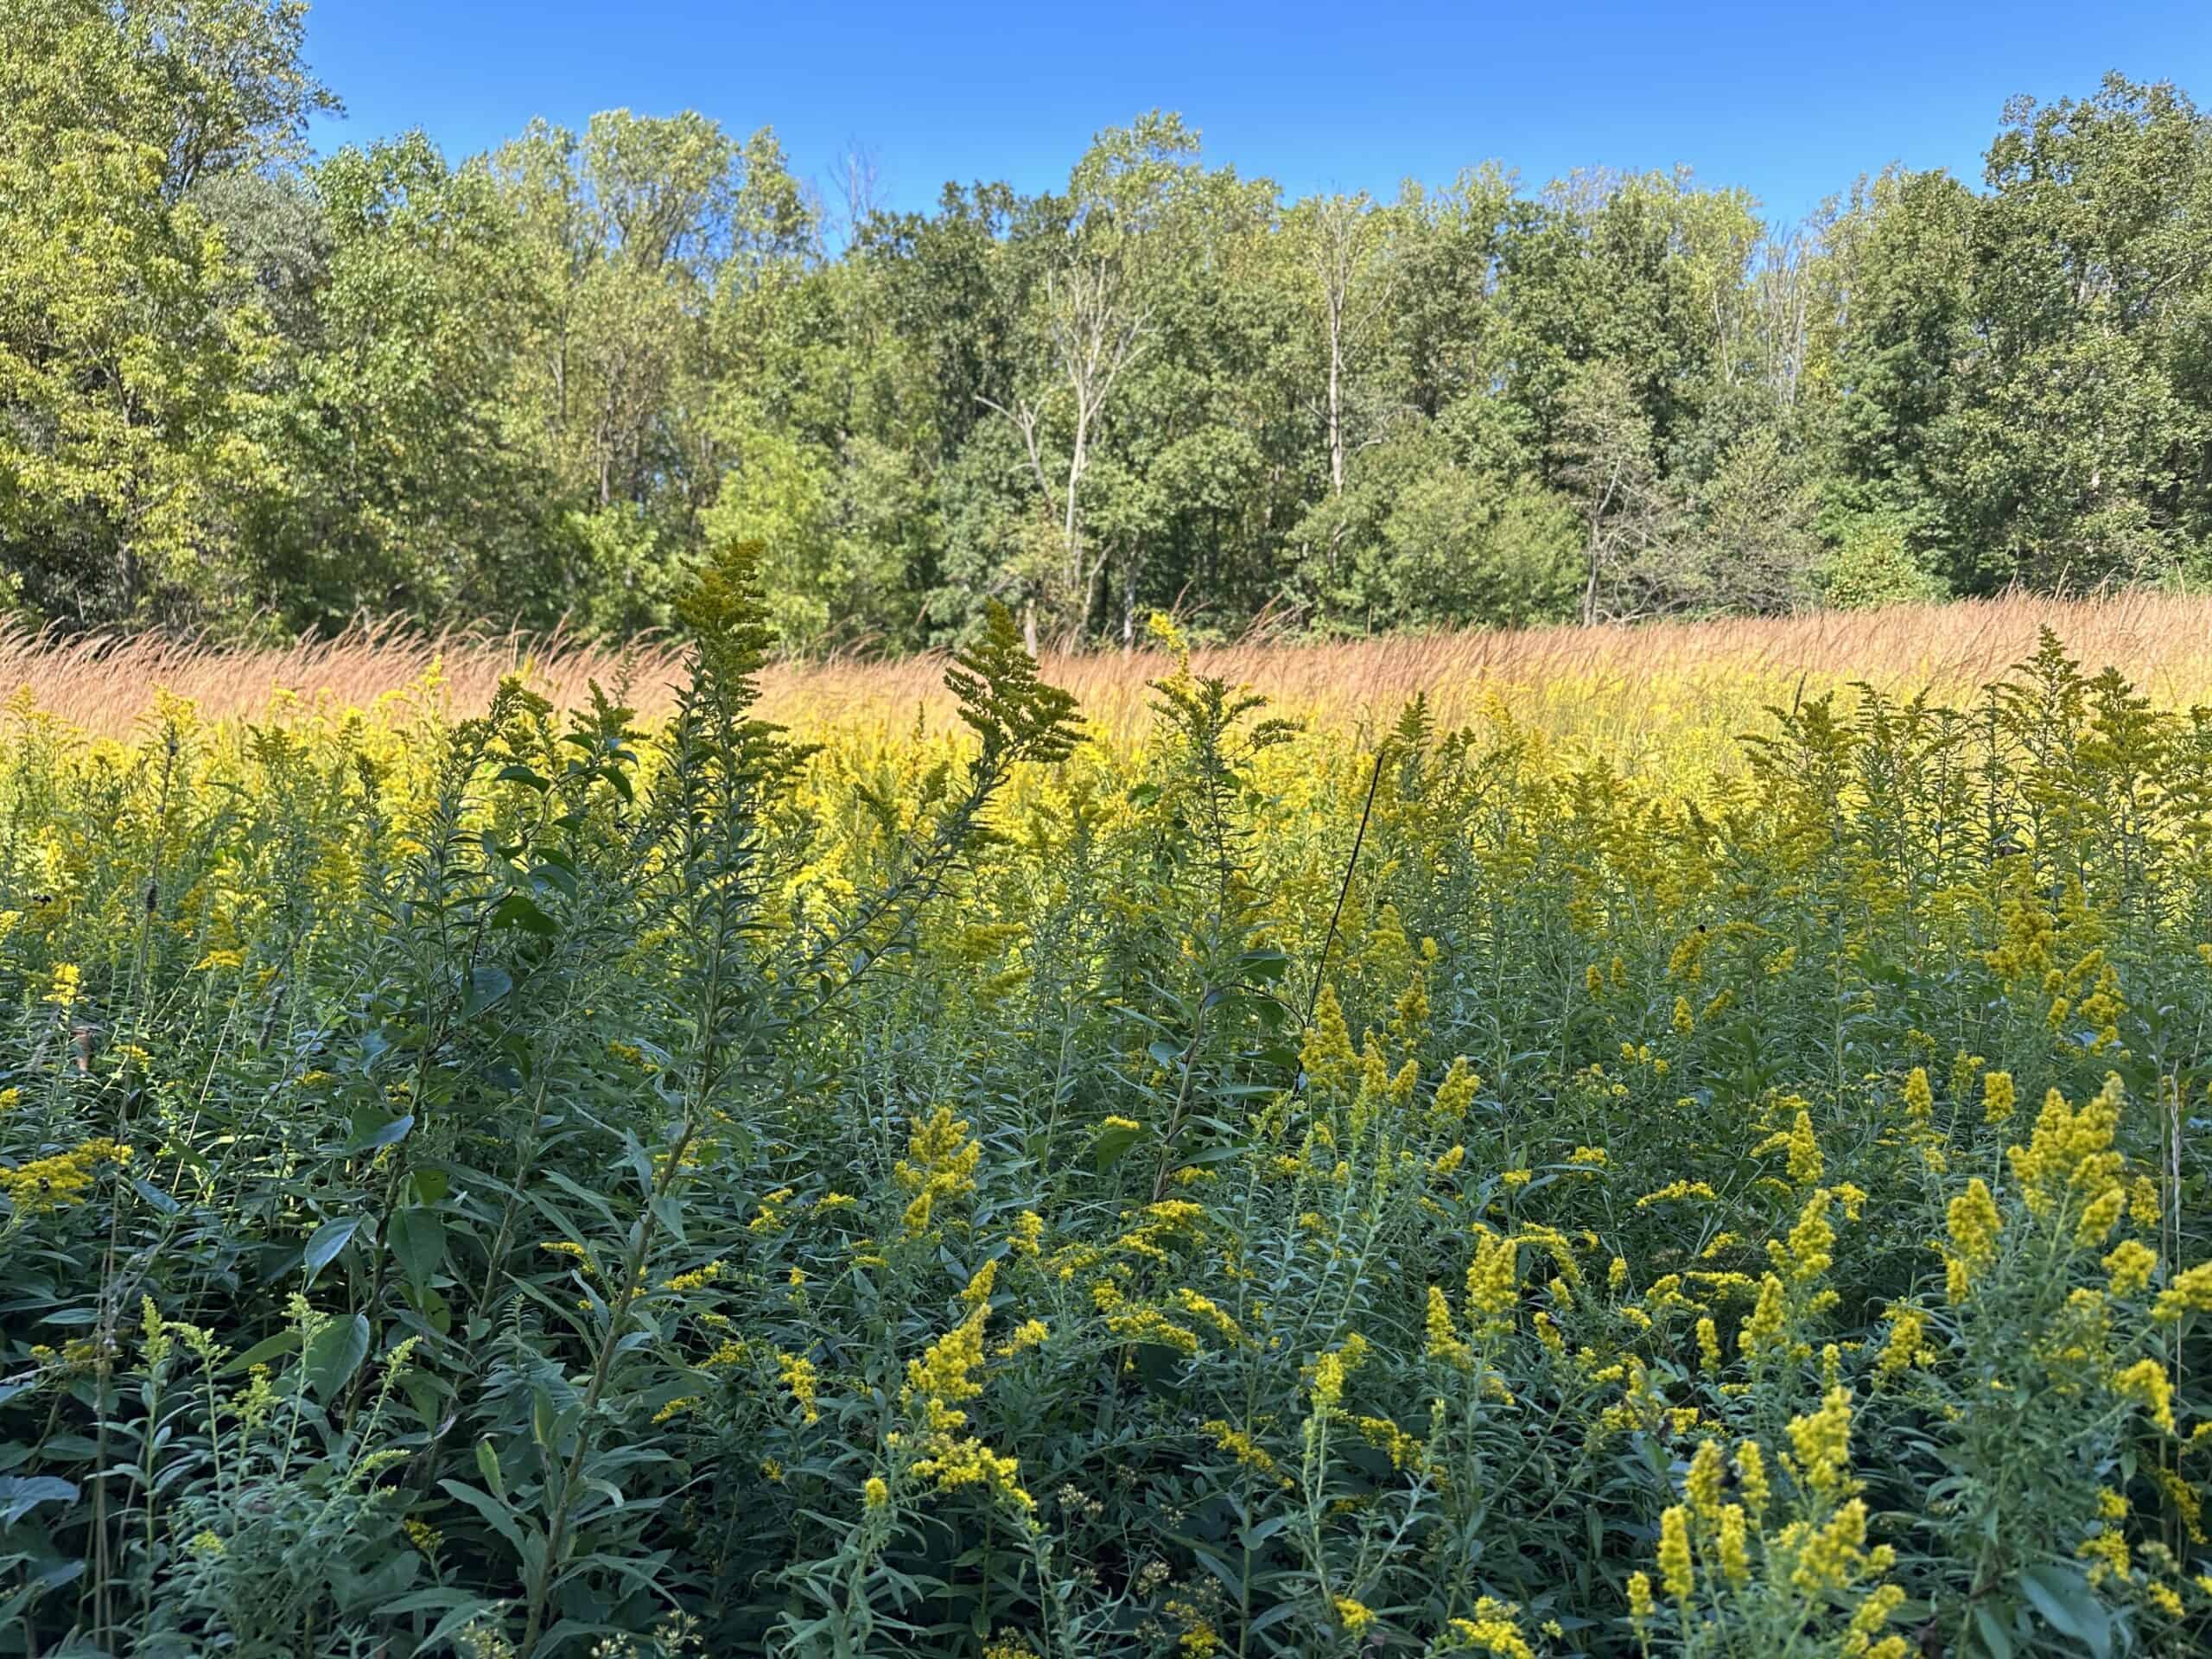 Meadow with goldenrod and native grasses with forest in the background